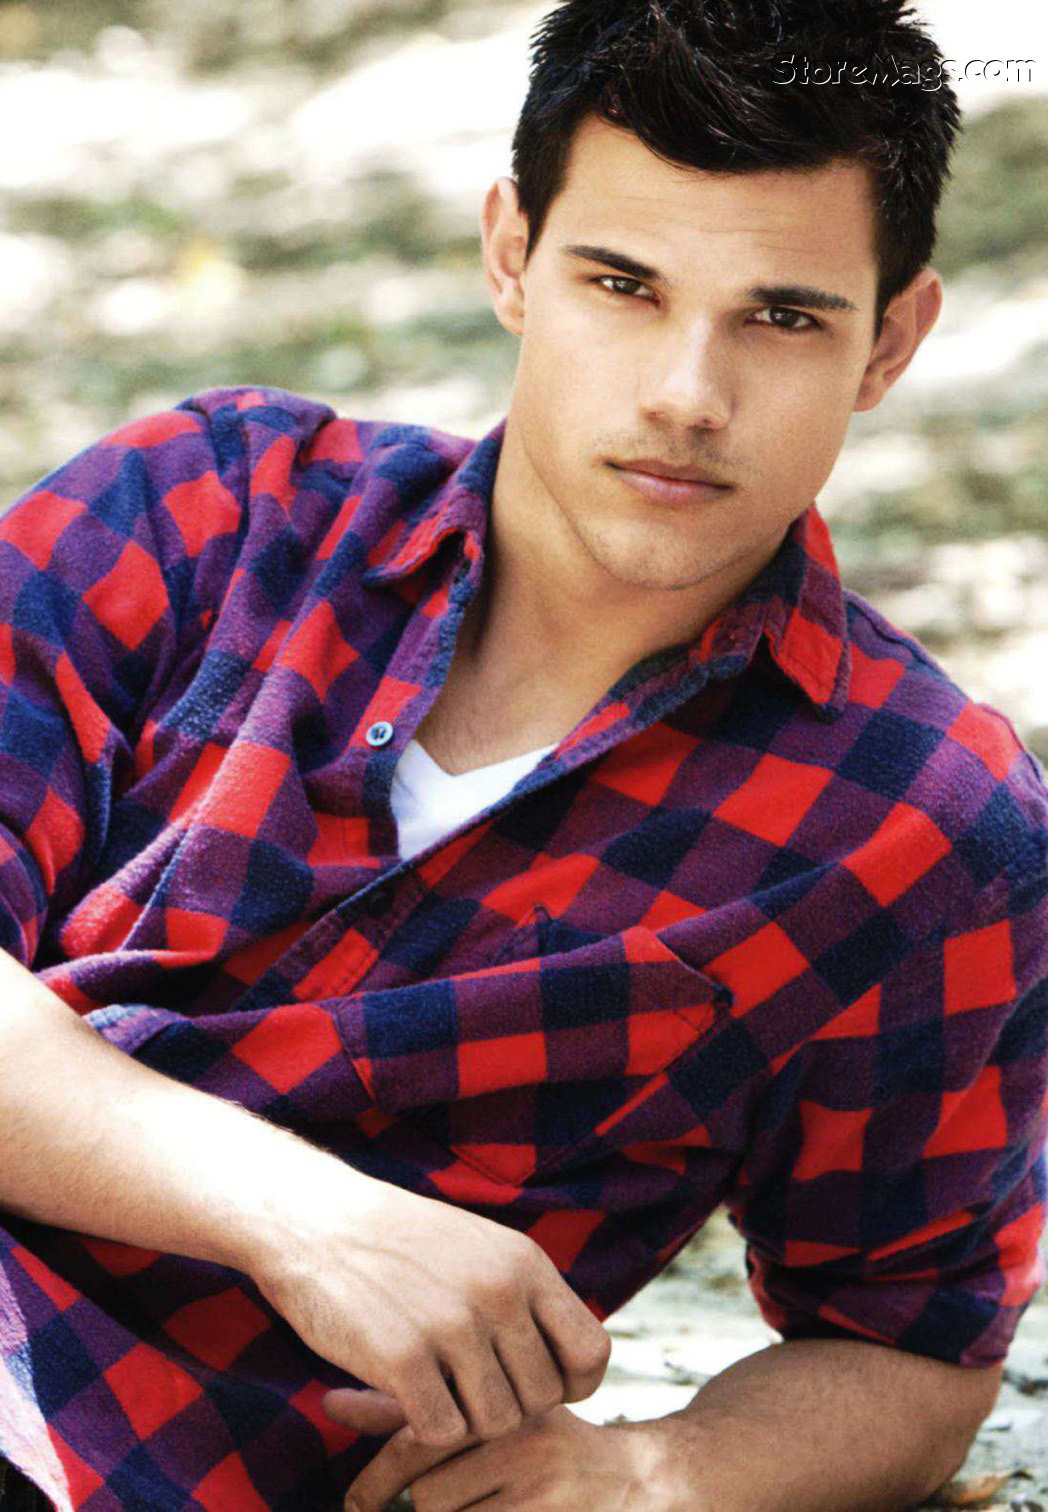 Taylor Lautner on the October